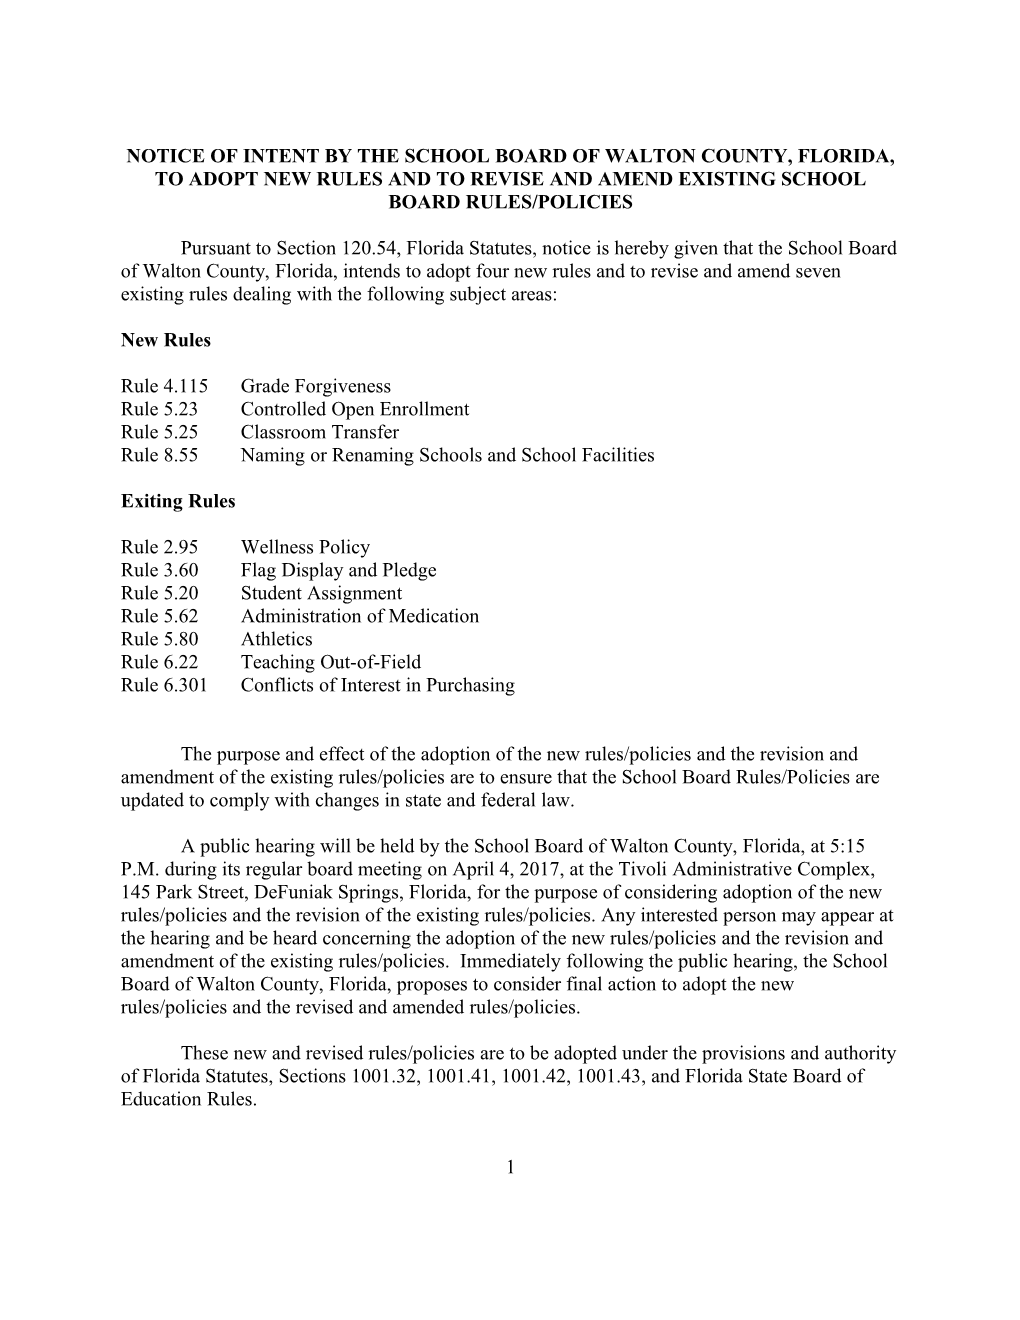 Notice of Intent by the School Board of Walton County, Florida, to Adopt New Rules And